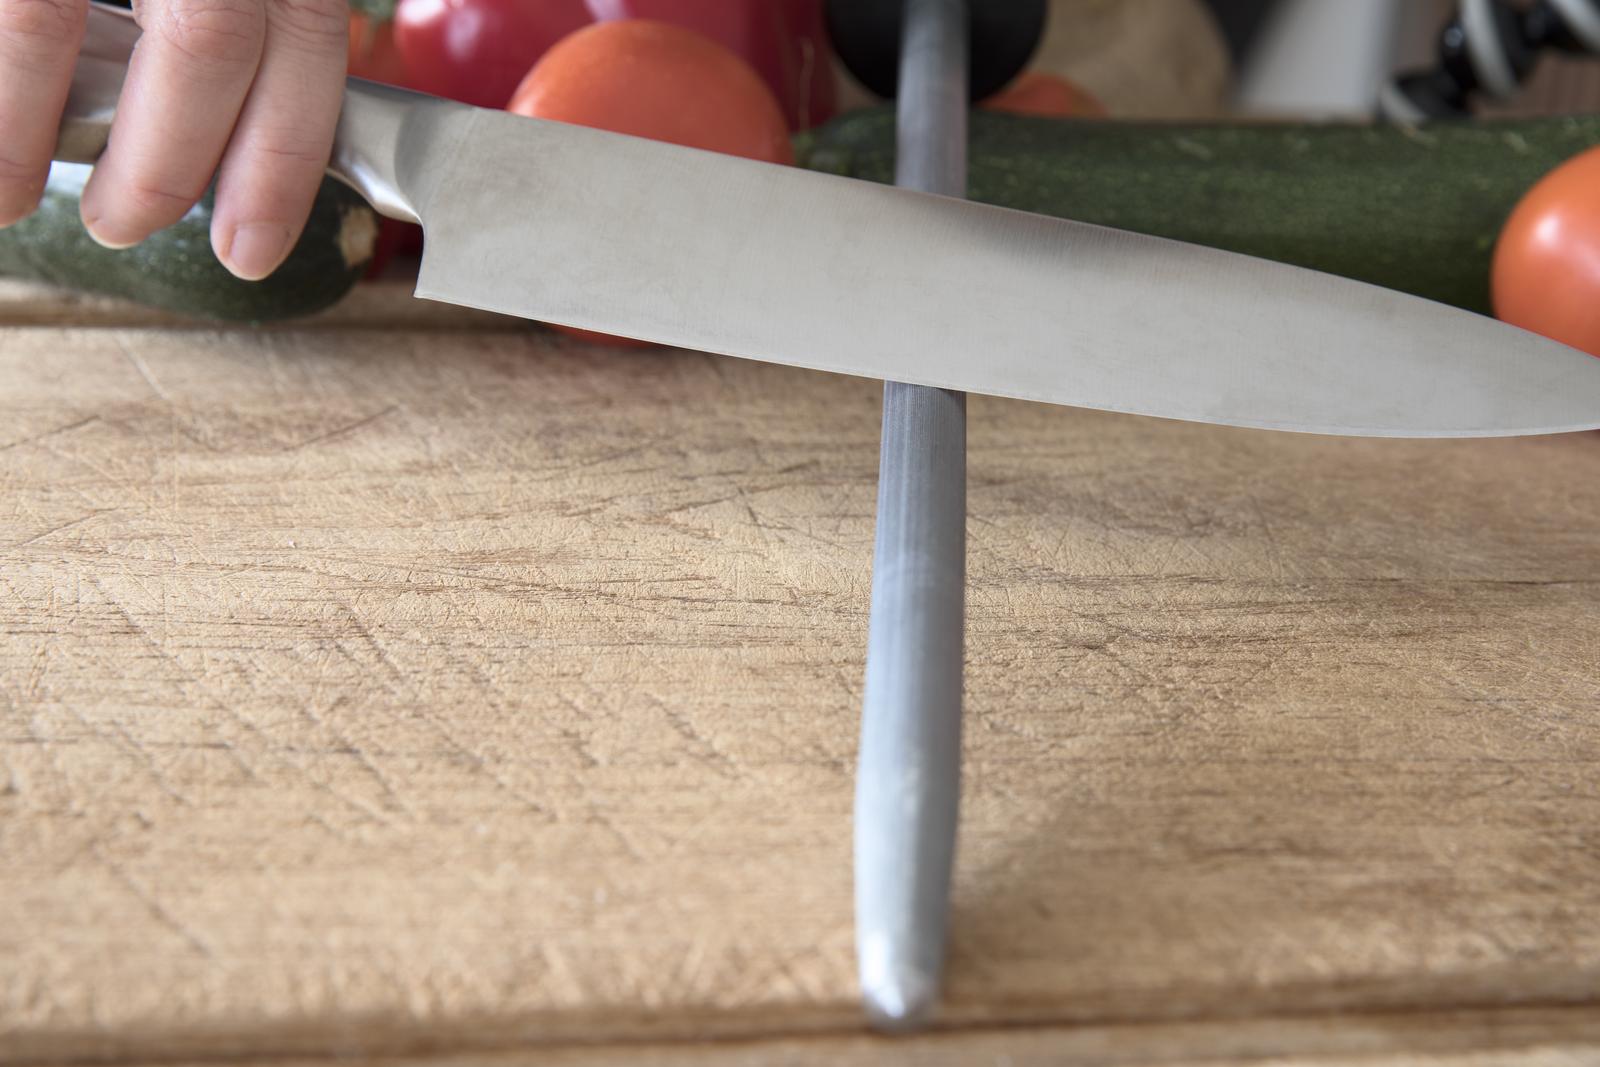 What is a Ceramic Honing Rod, and How to Use One to Keep Your Knives Sharp